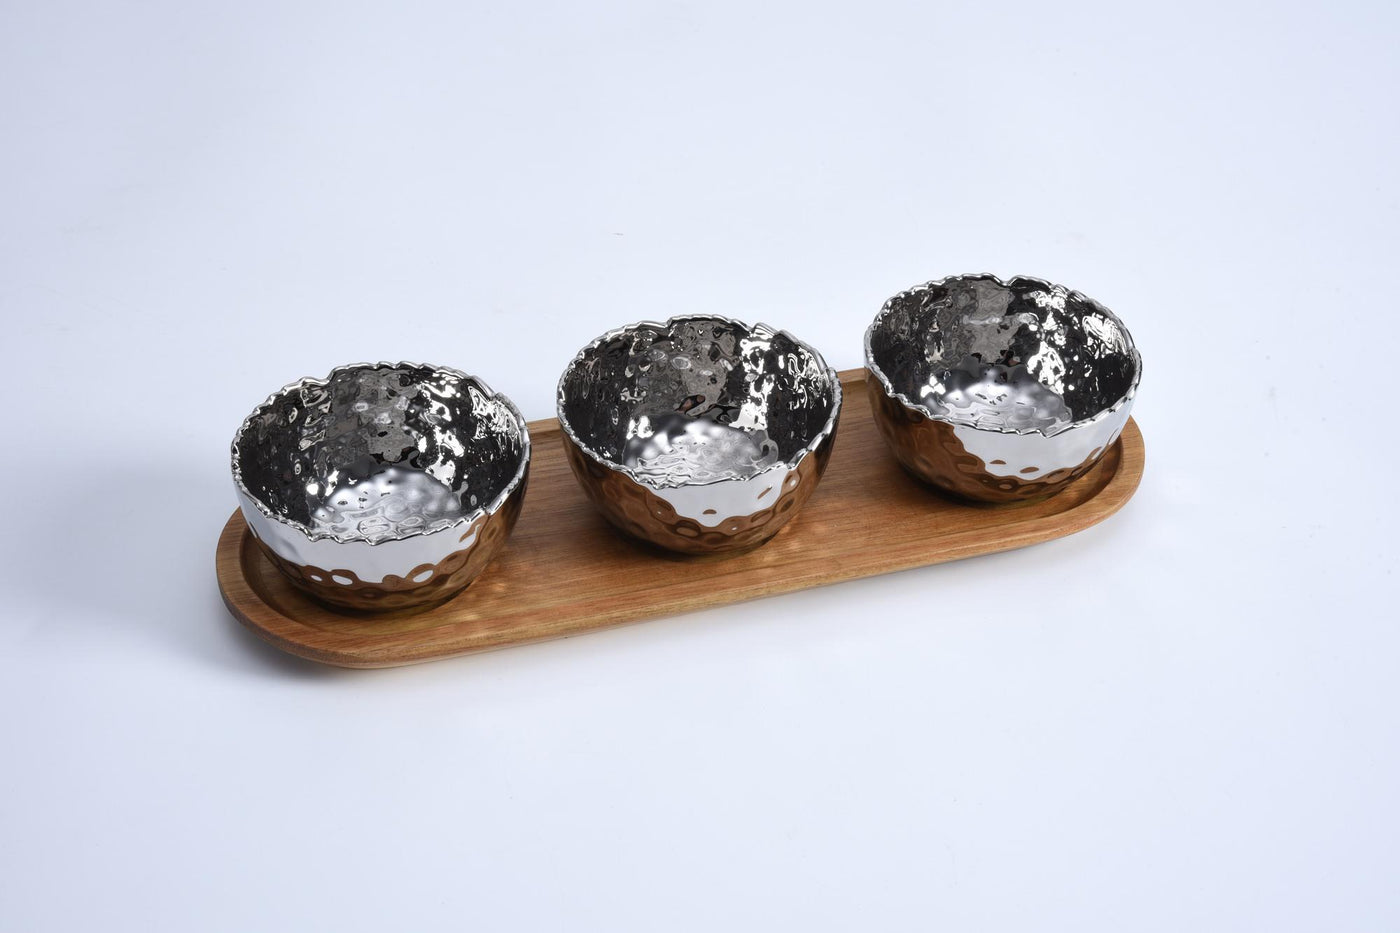 Pampa Bay Set of 3 Porcelain Bowls on Acacia Wood Tray (1 Count) - Set With Style